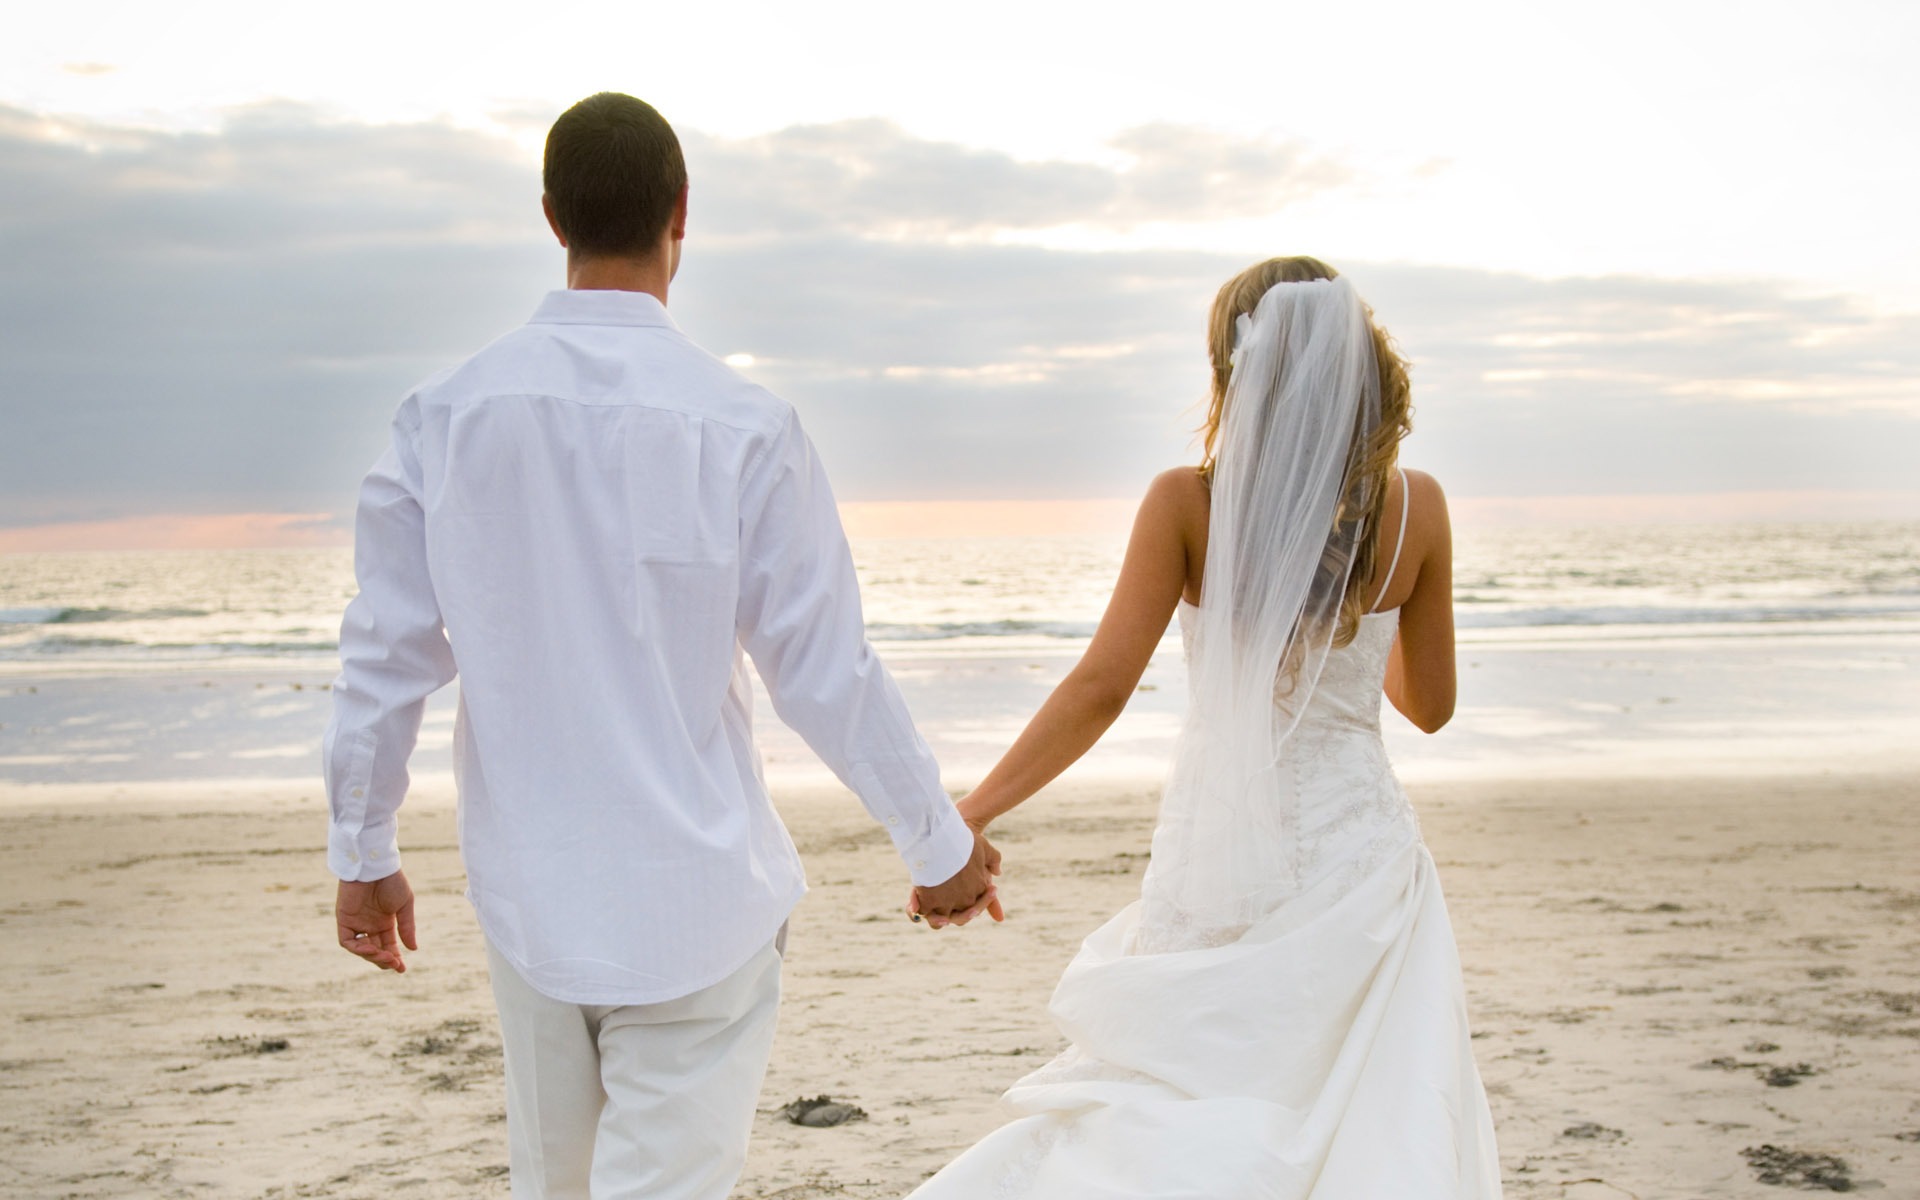 7 Things About Marriage I Wish I'd Known As A Newlywed – by Winifred ...